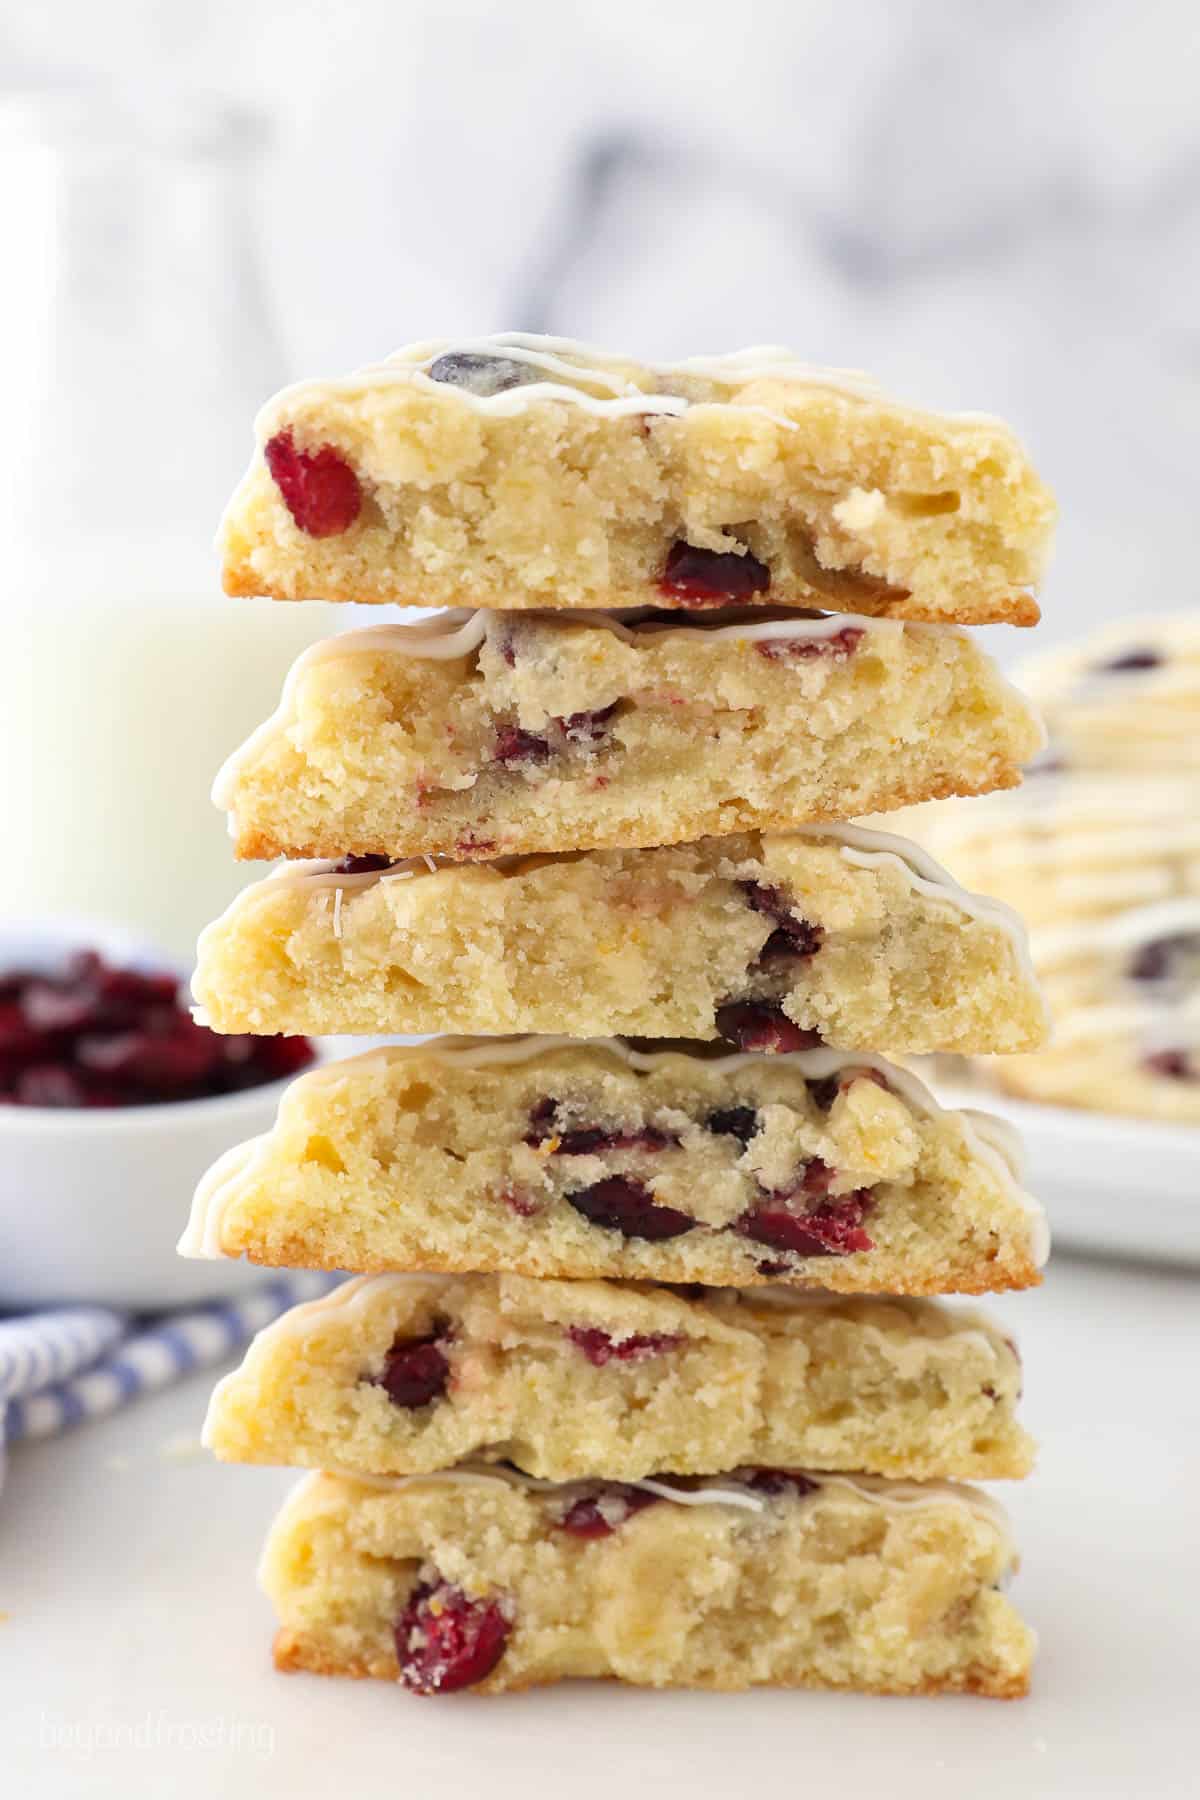 a stack of 6 halves of cookies, showing the inside stuffed with cranberries